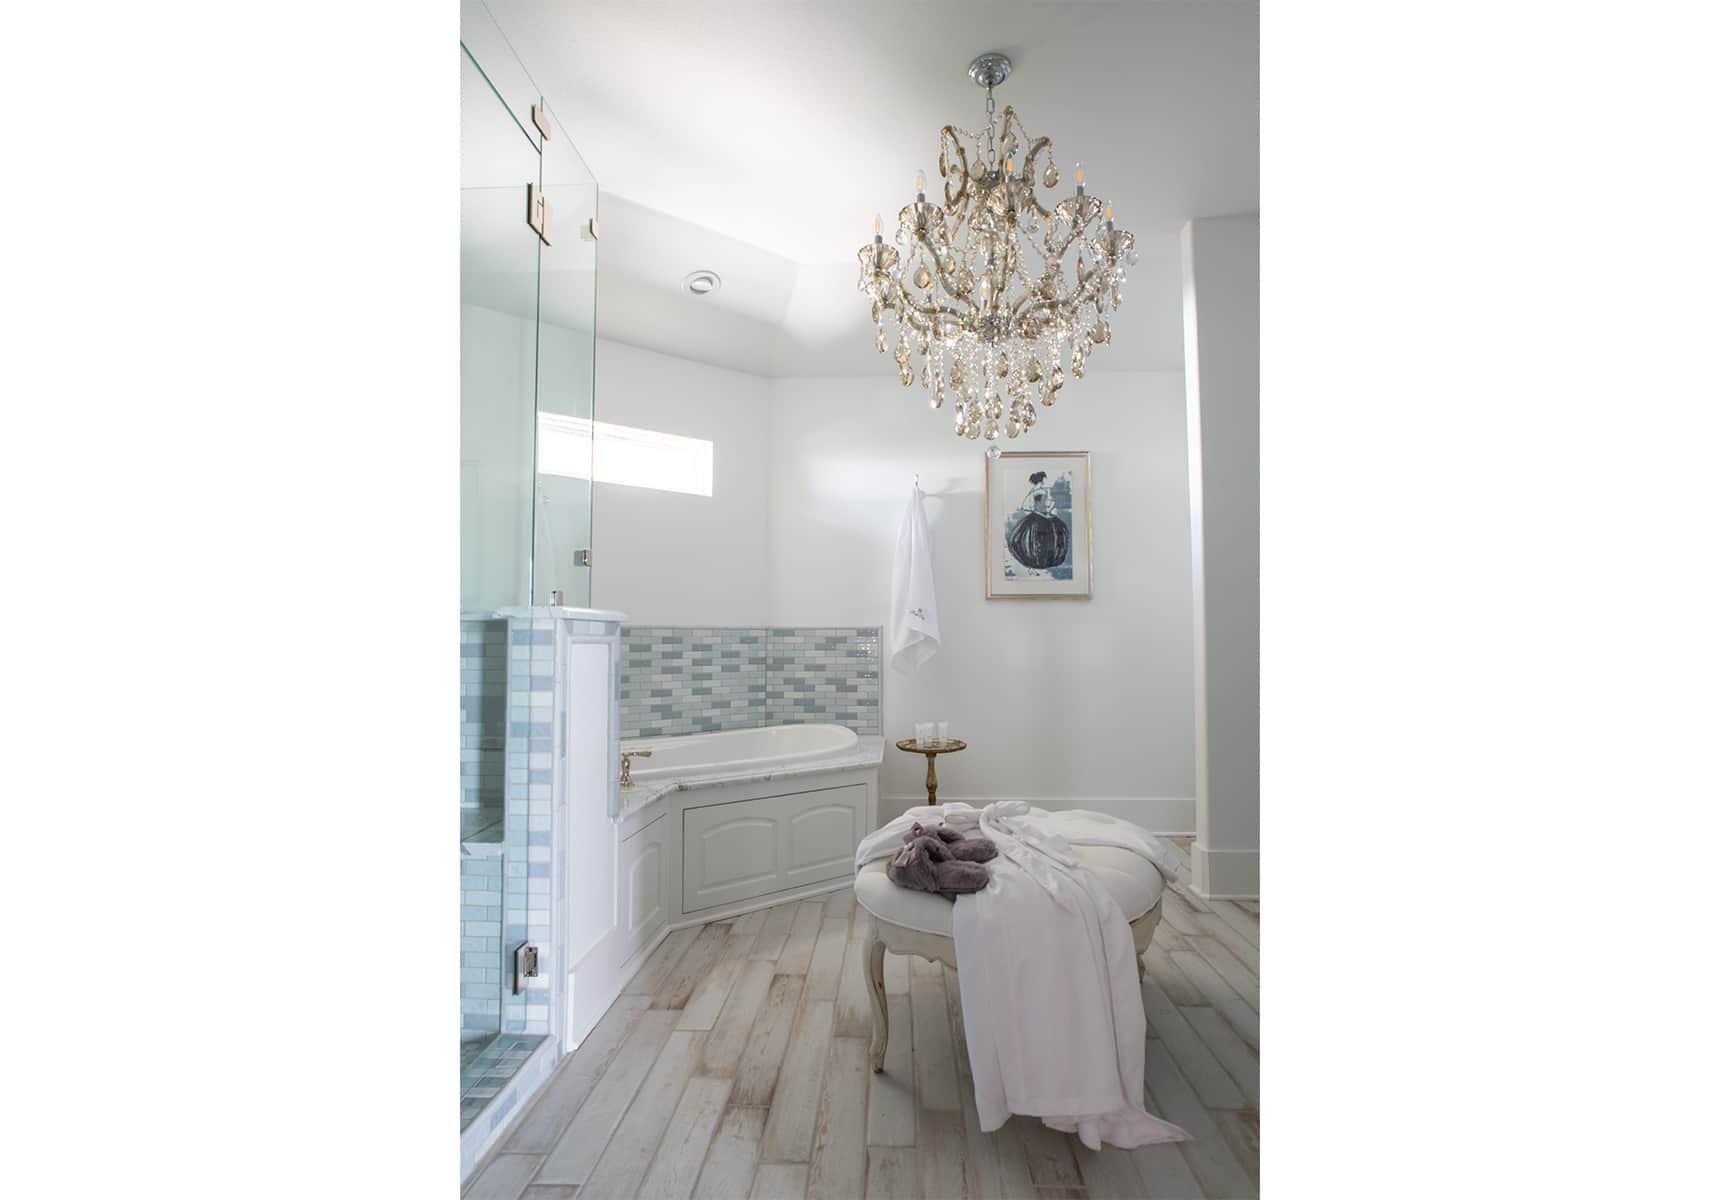 Bathroom with a walk-in shower a tub and a chandelier